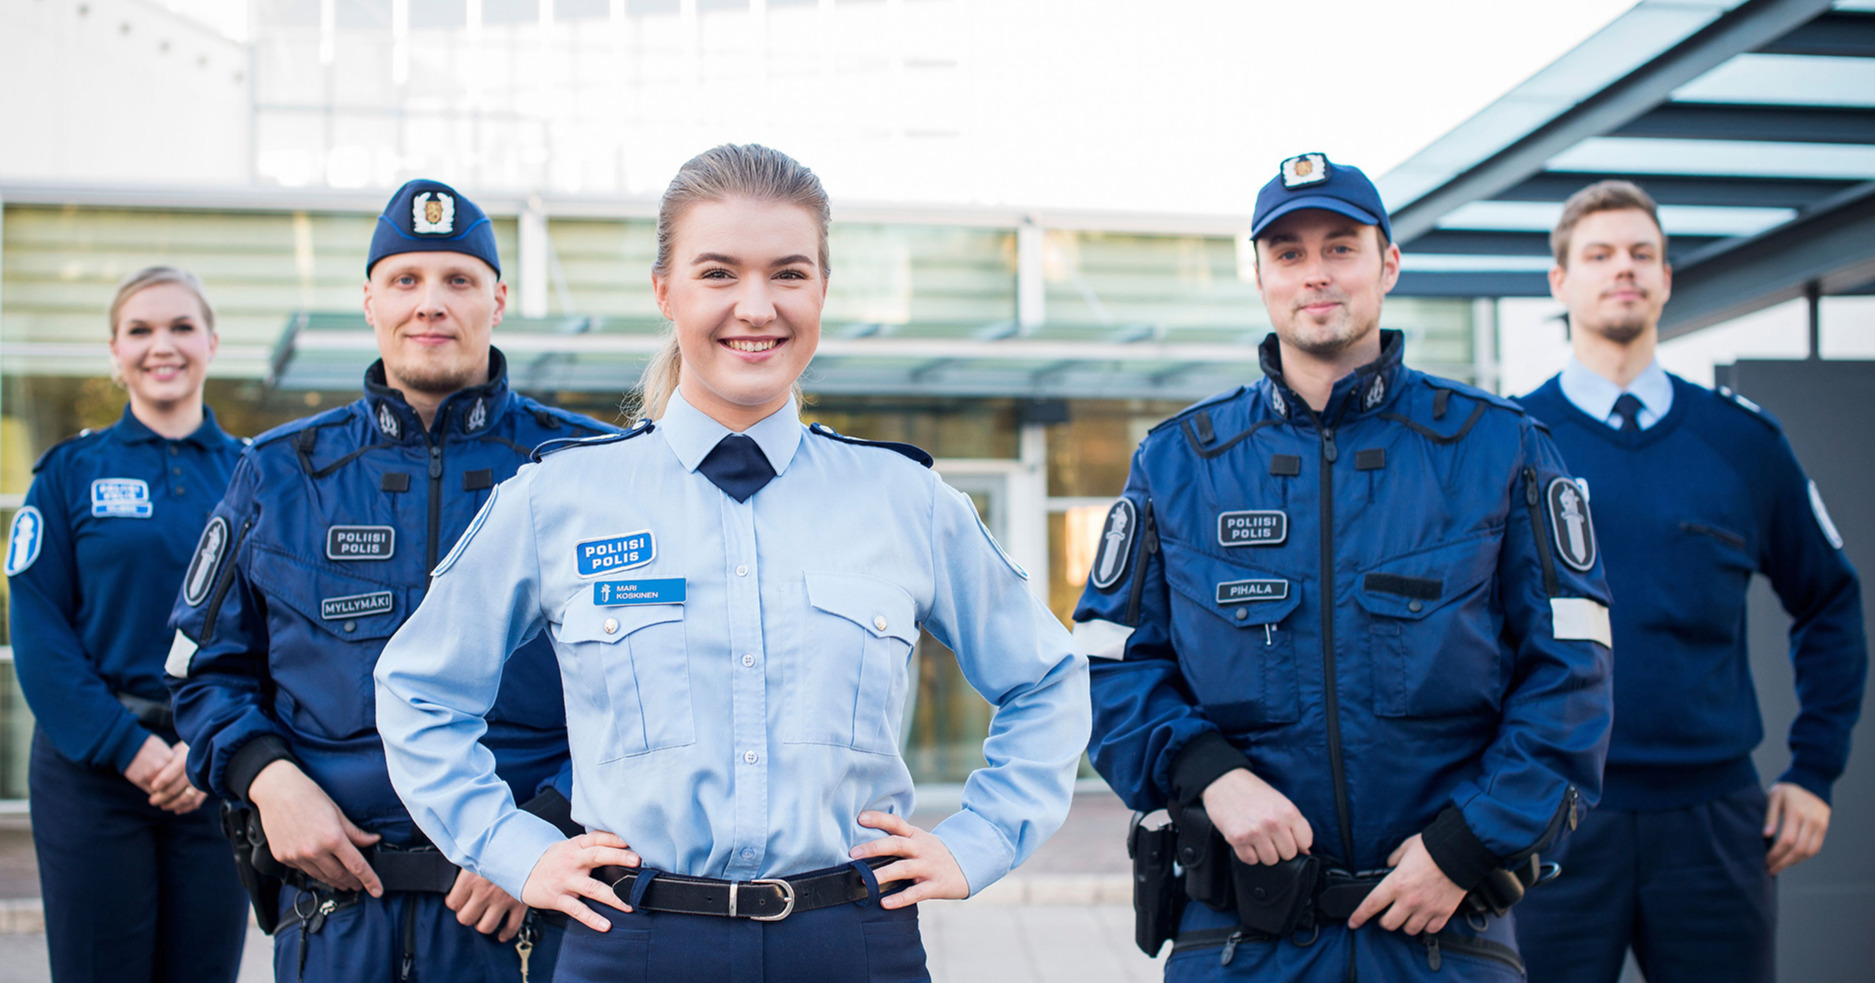 Five smiling police students in uniform standing in the courtyard of the Police University College.